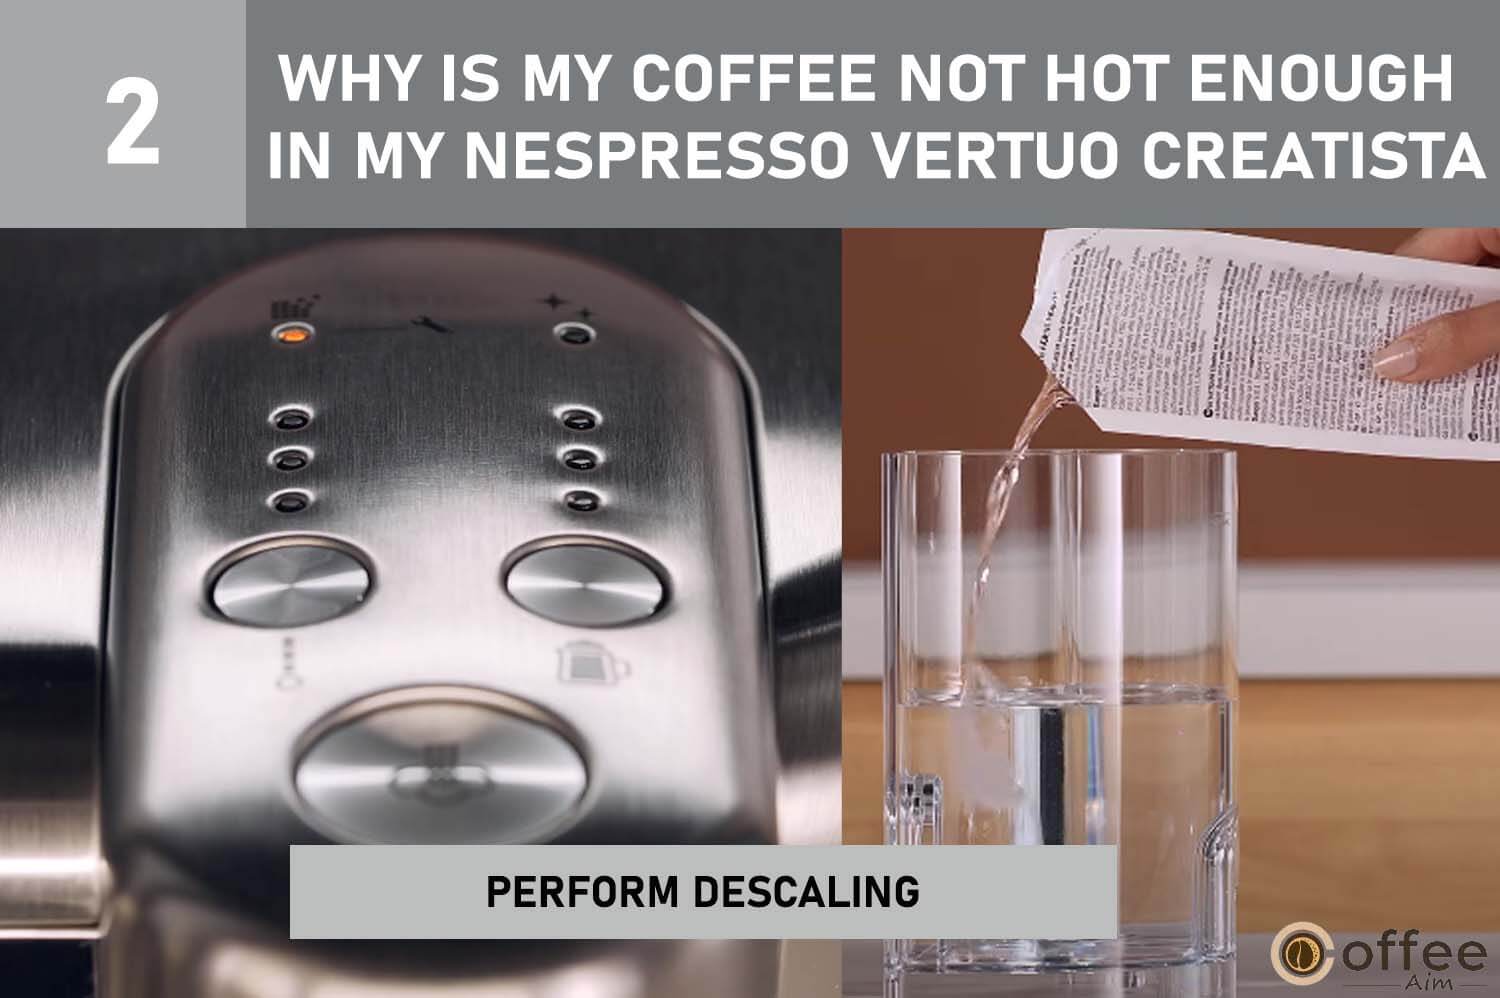 The image shows how to descale the Nespresso Vertuo Creatista to make your coffee hotter. It's part of a troubleshooting guide.




